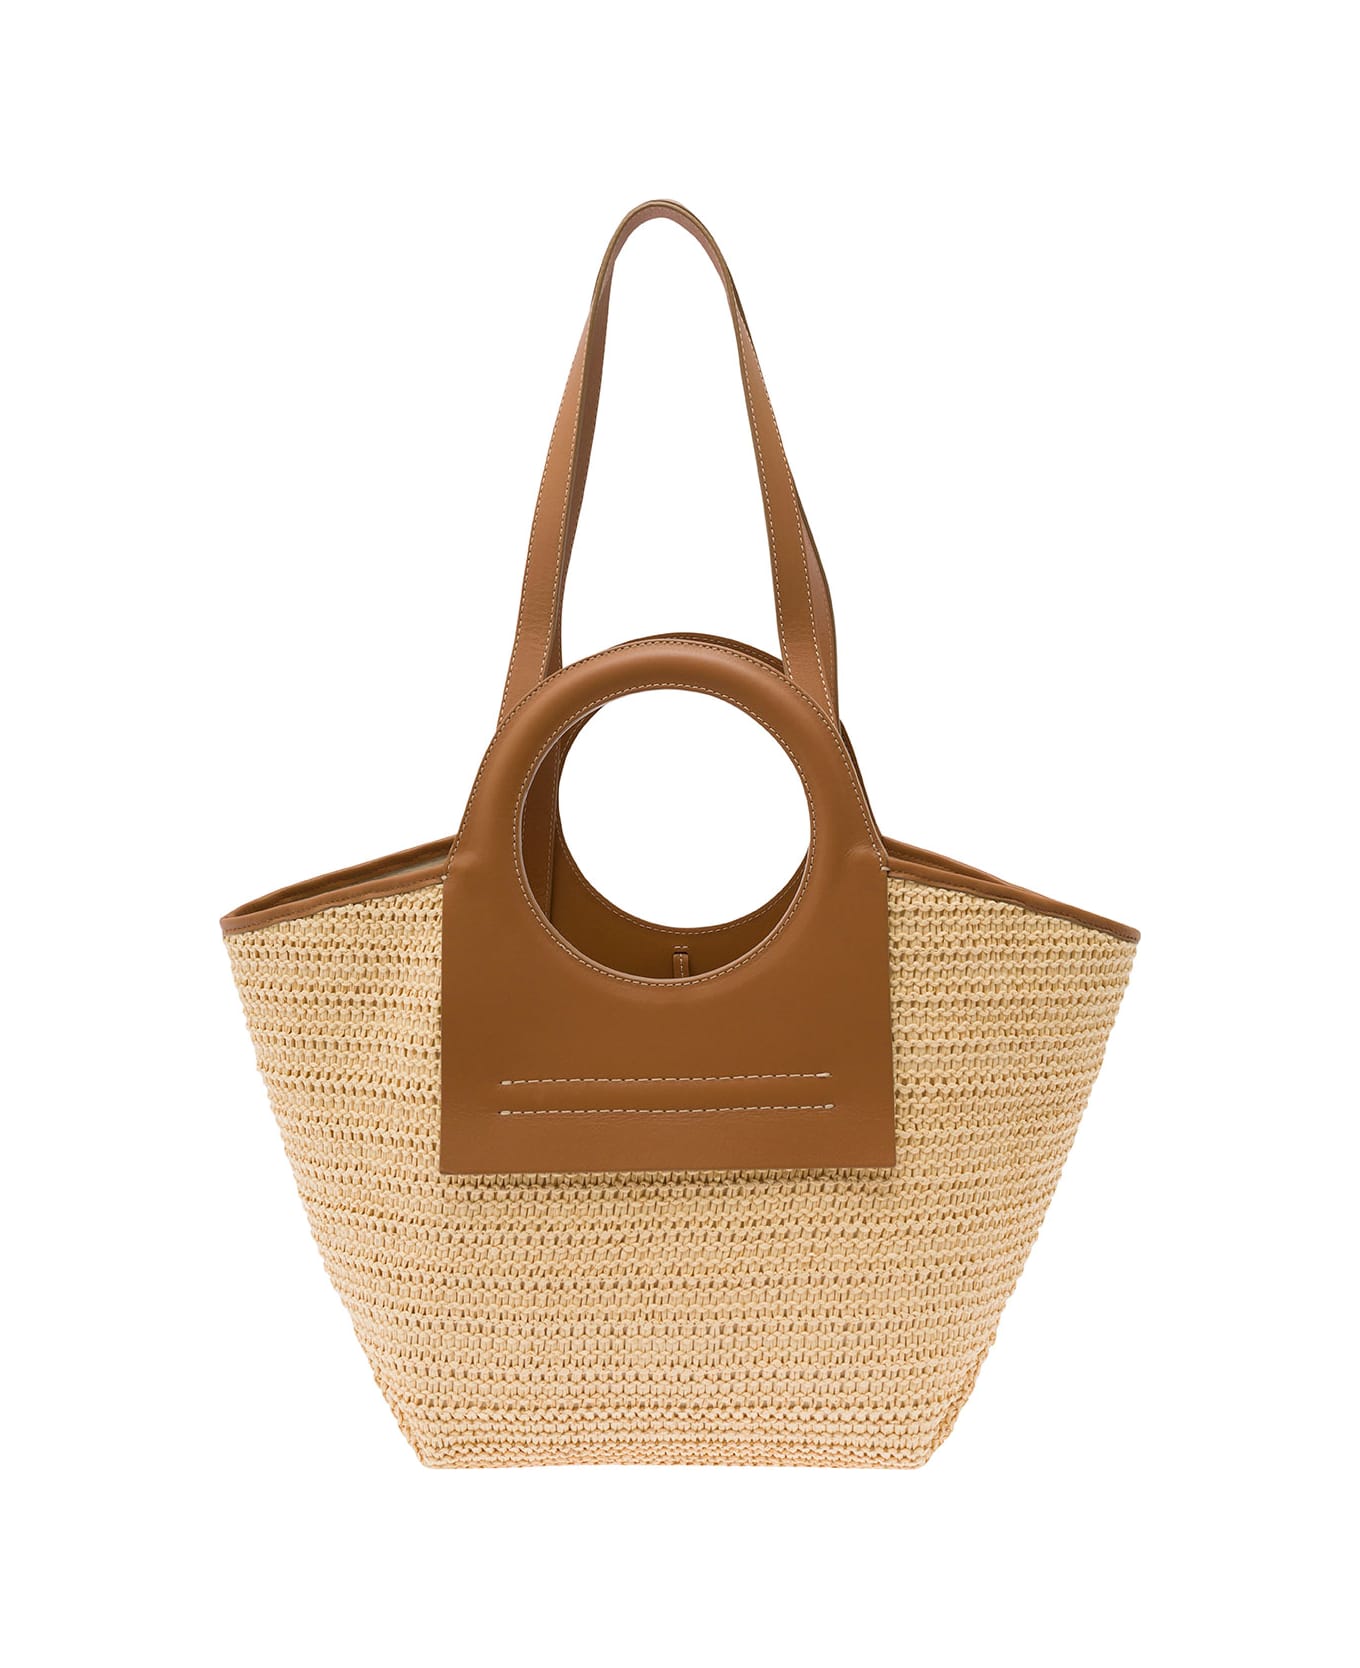 Hereu 'cala S Raffia' Brown And Beige Handbag With Leather Handles In Rafia Woman - Brown トートバッグ